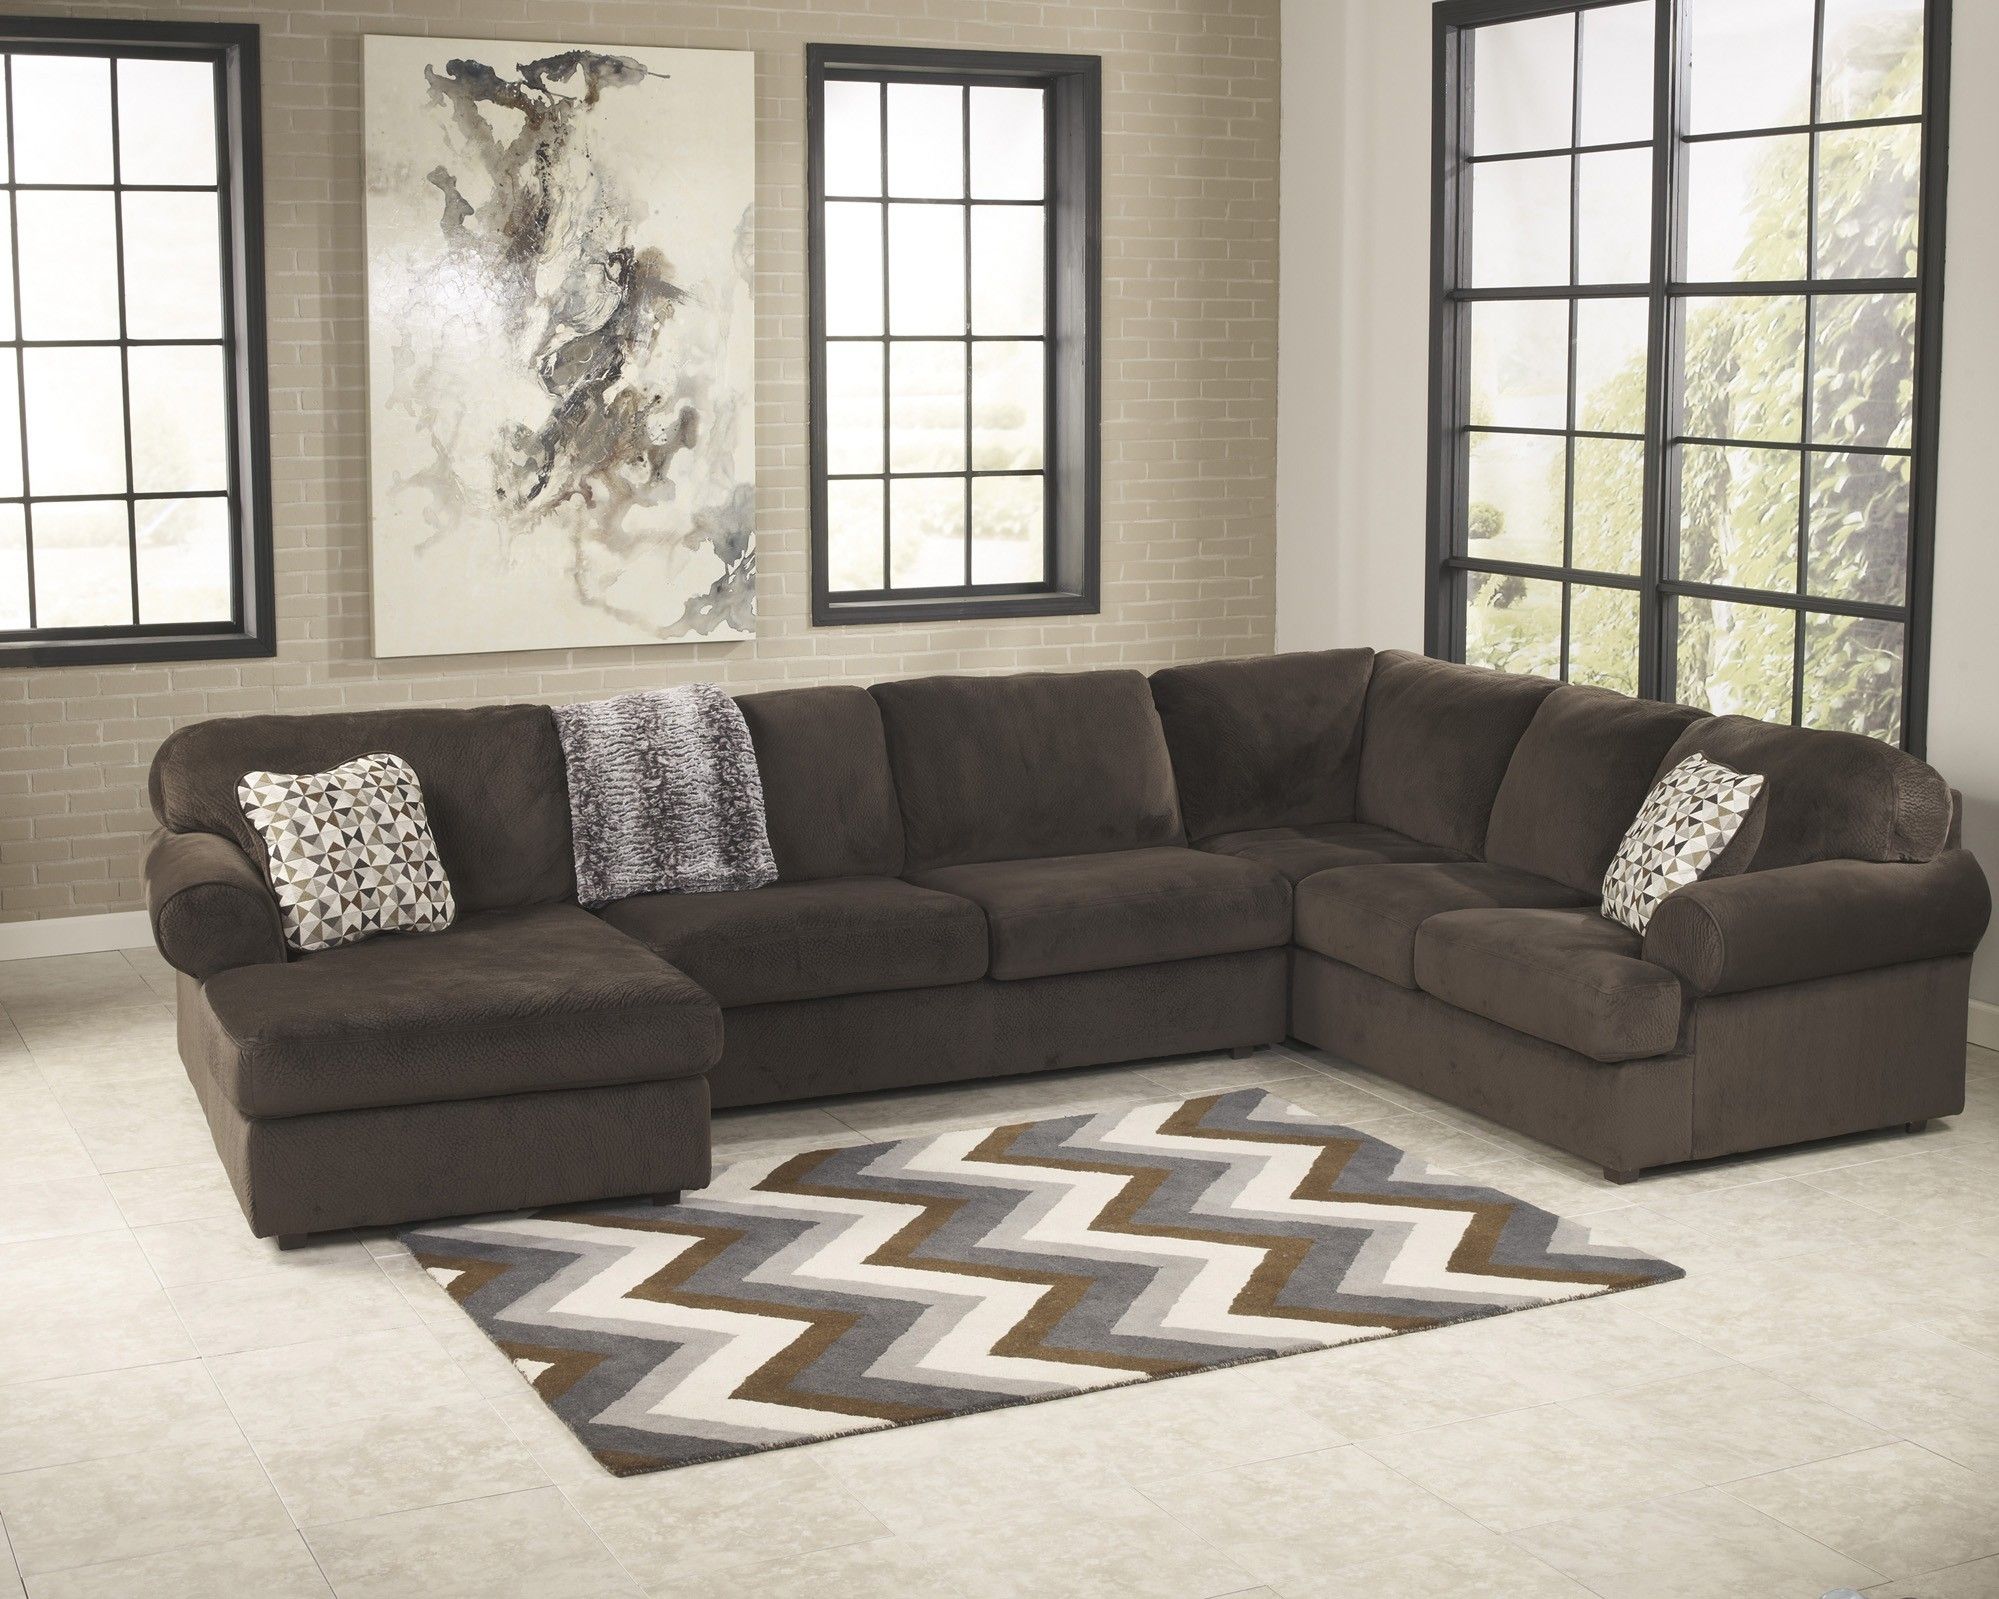 Jessa Place Chocolate 3 Piece Sectional Sofa For $ (View 3 of 10)